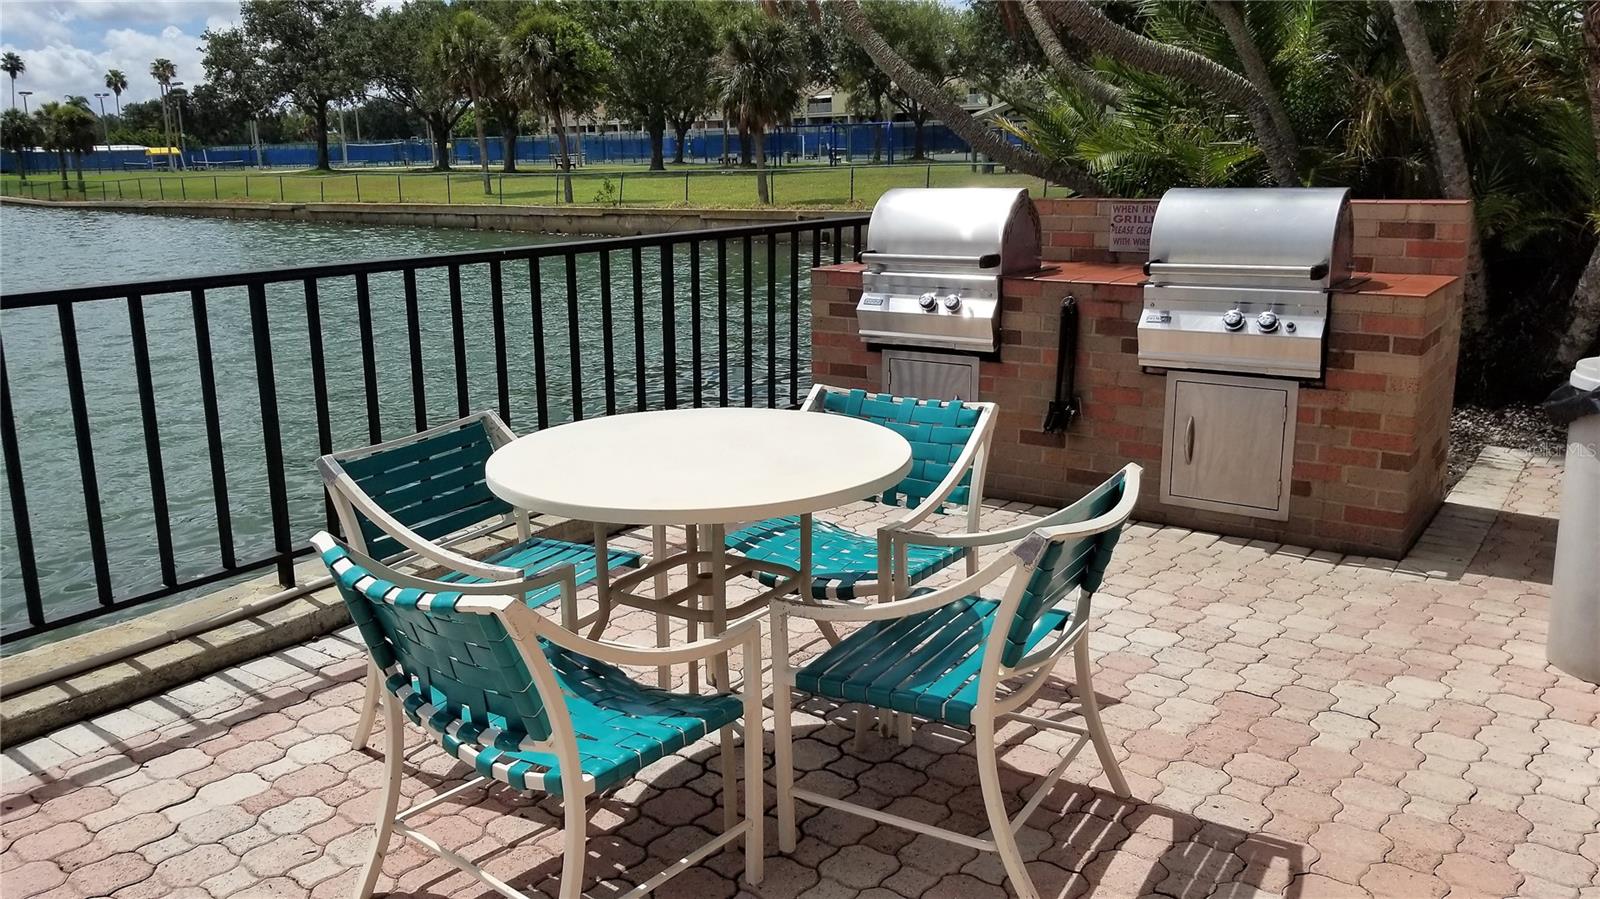 Outdoor grilling area